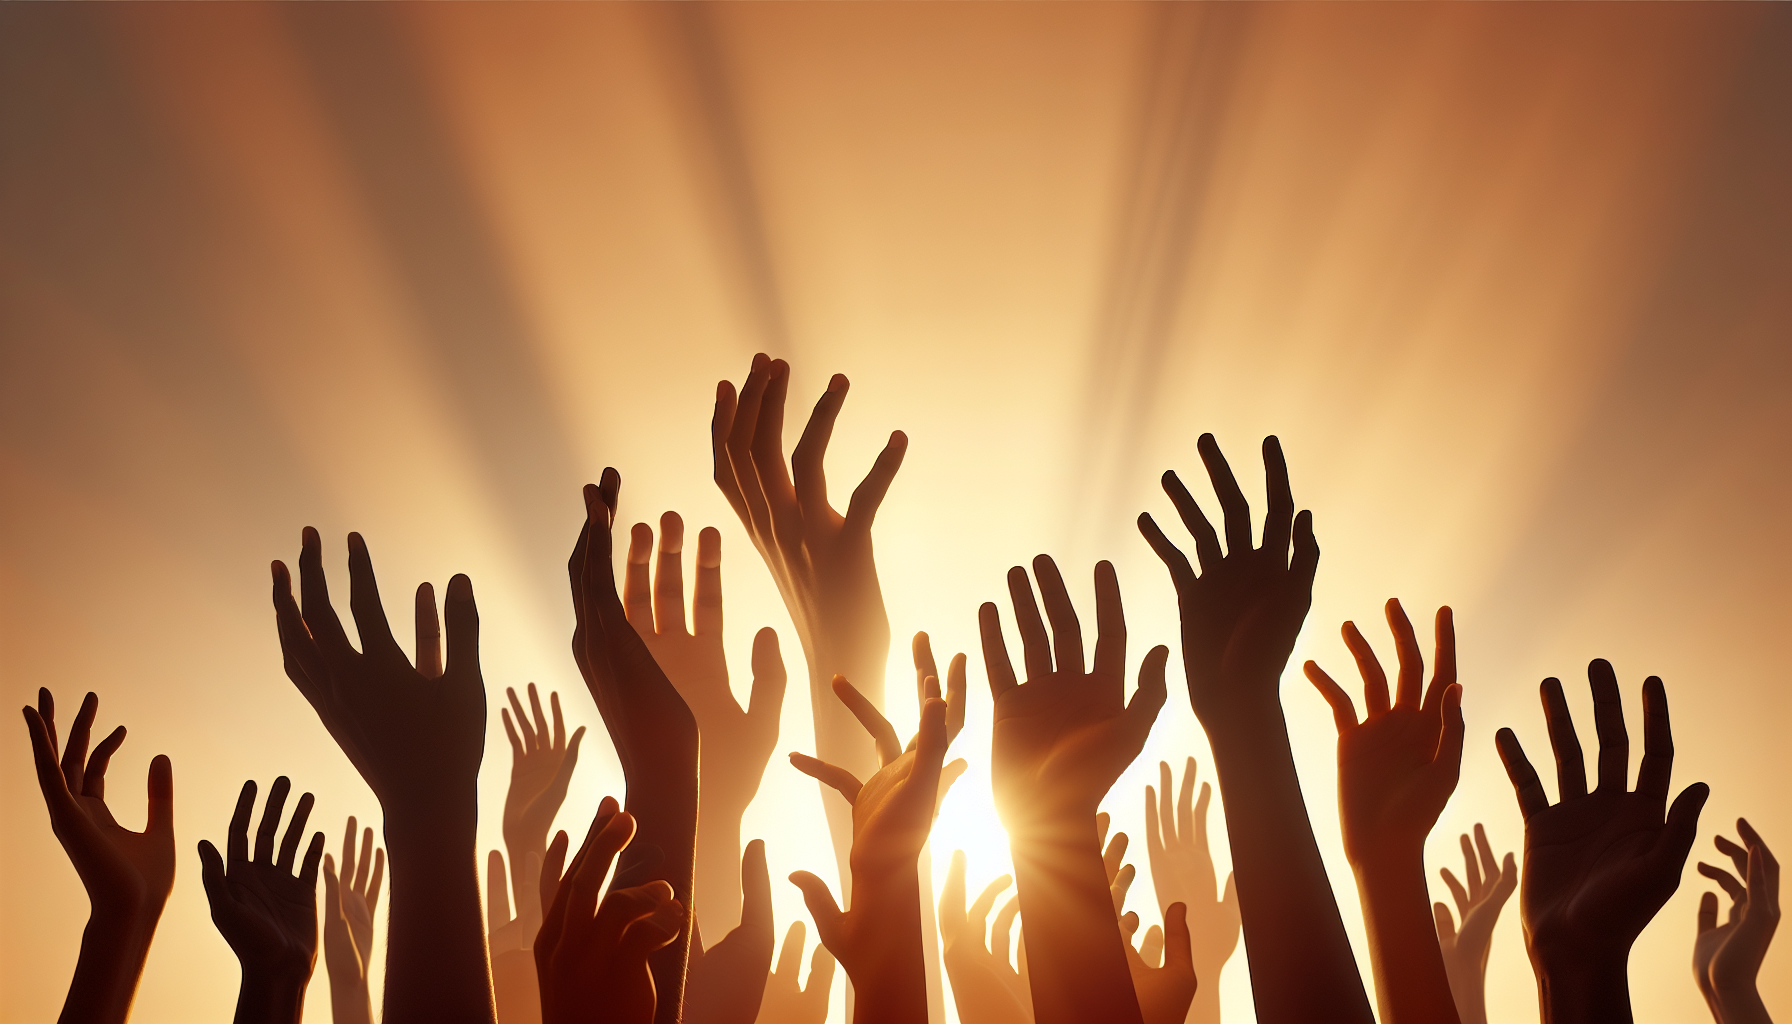 Hands raised in worship, surrounded by a warm glow, depicting the engagement in worship and praise to break free from spiritual heaviness.